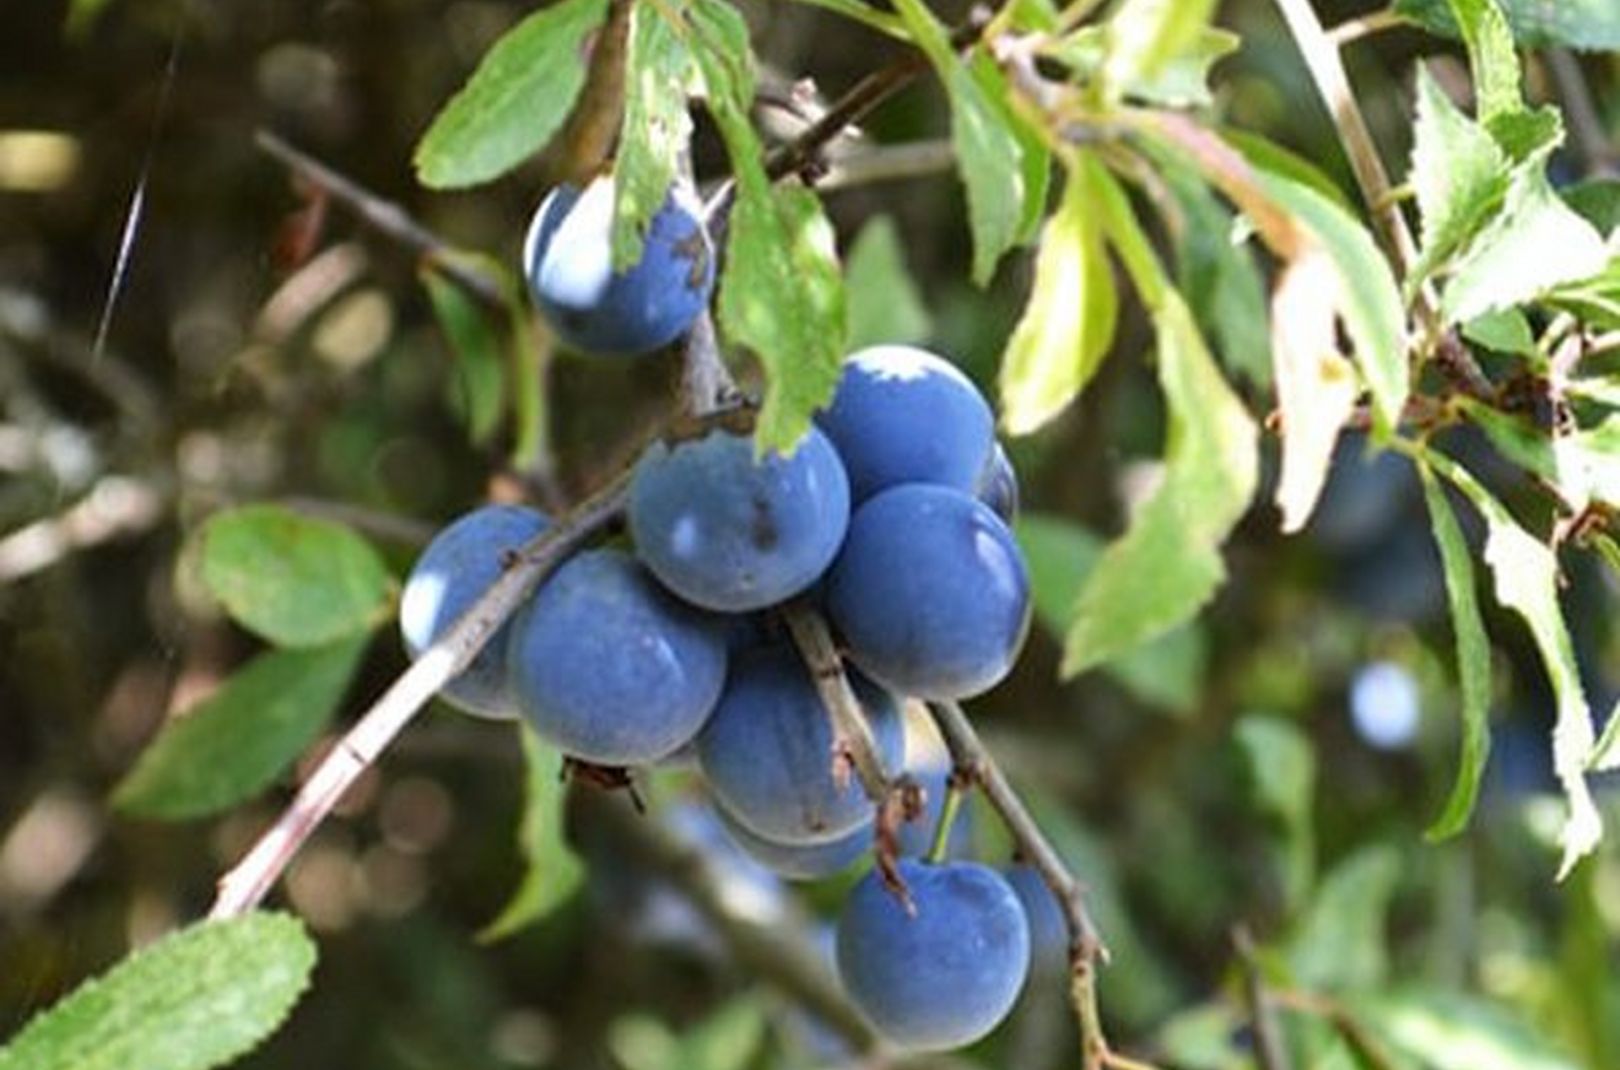 Sloes ripe for picking ready to be used in a sloe gin recipe